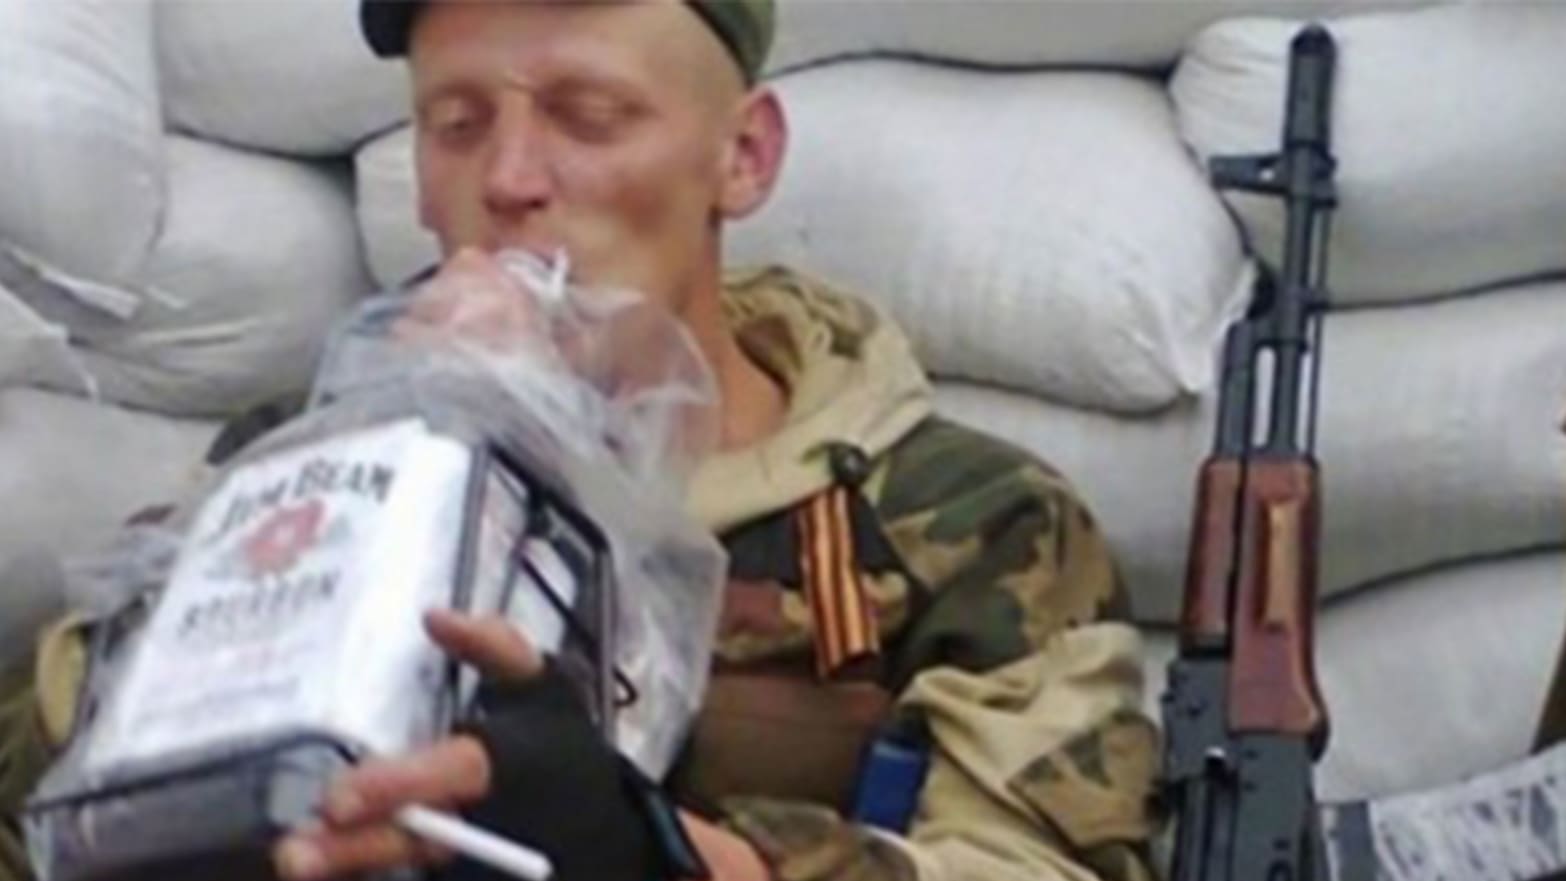 Kharkiv Locals Kill Russian Soldiers by Treating Them to Food Laced With Poison, Ukraine Officials Reports image